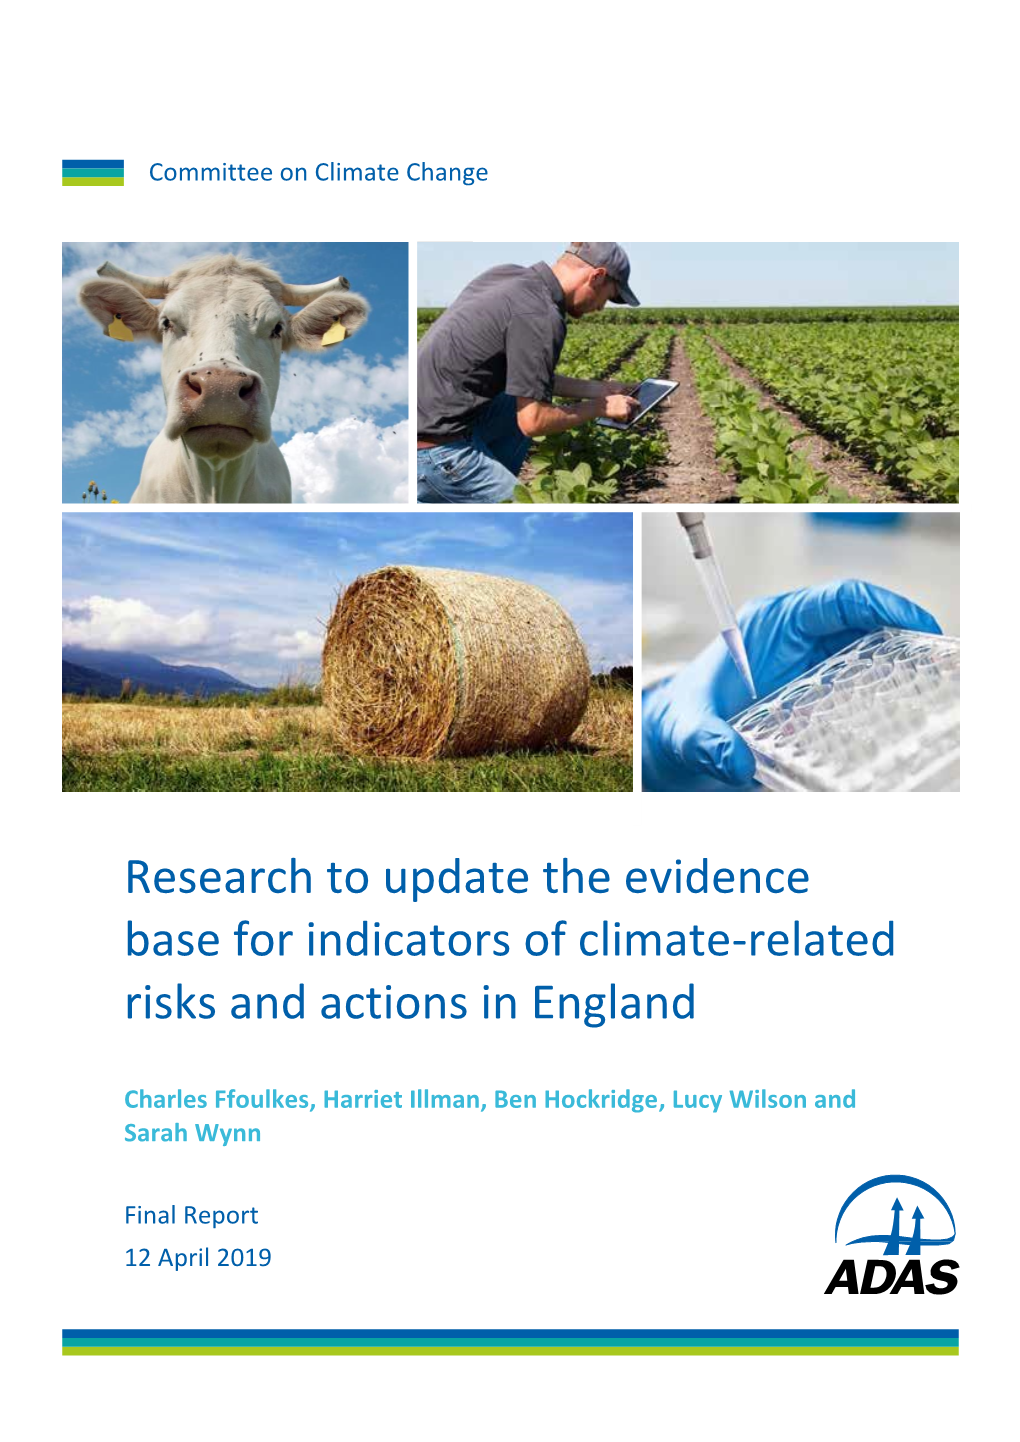 Research to Update the Evidence Base for Indicators of Climate-Related Risks and Actions in England